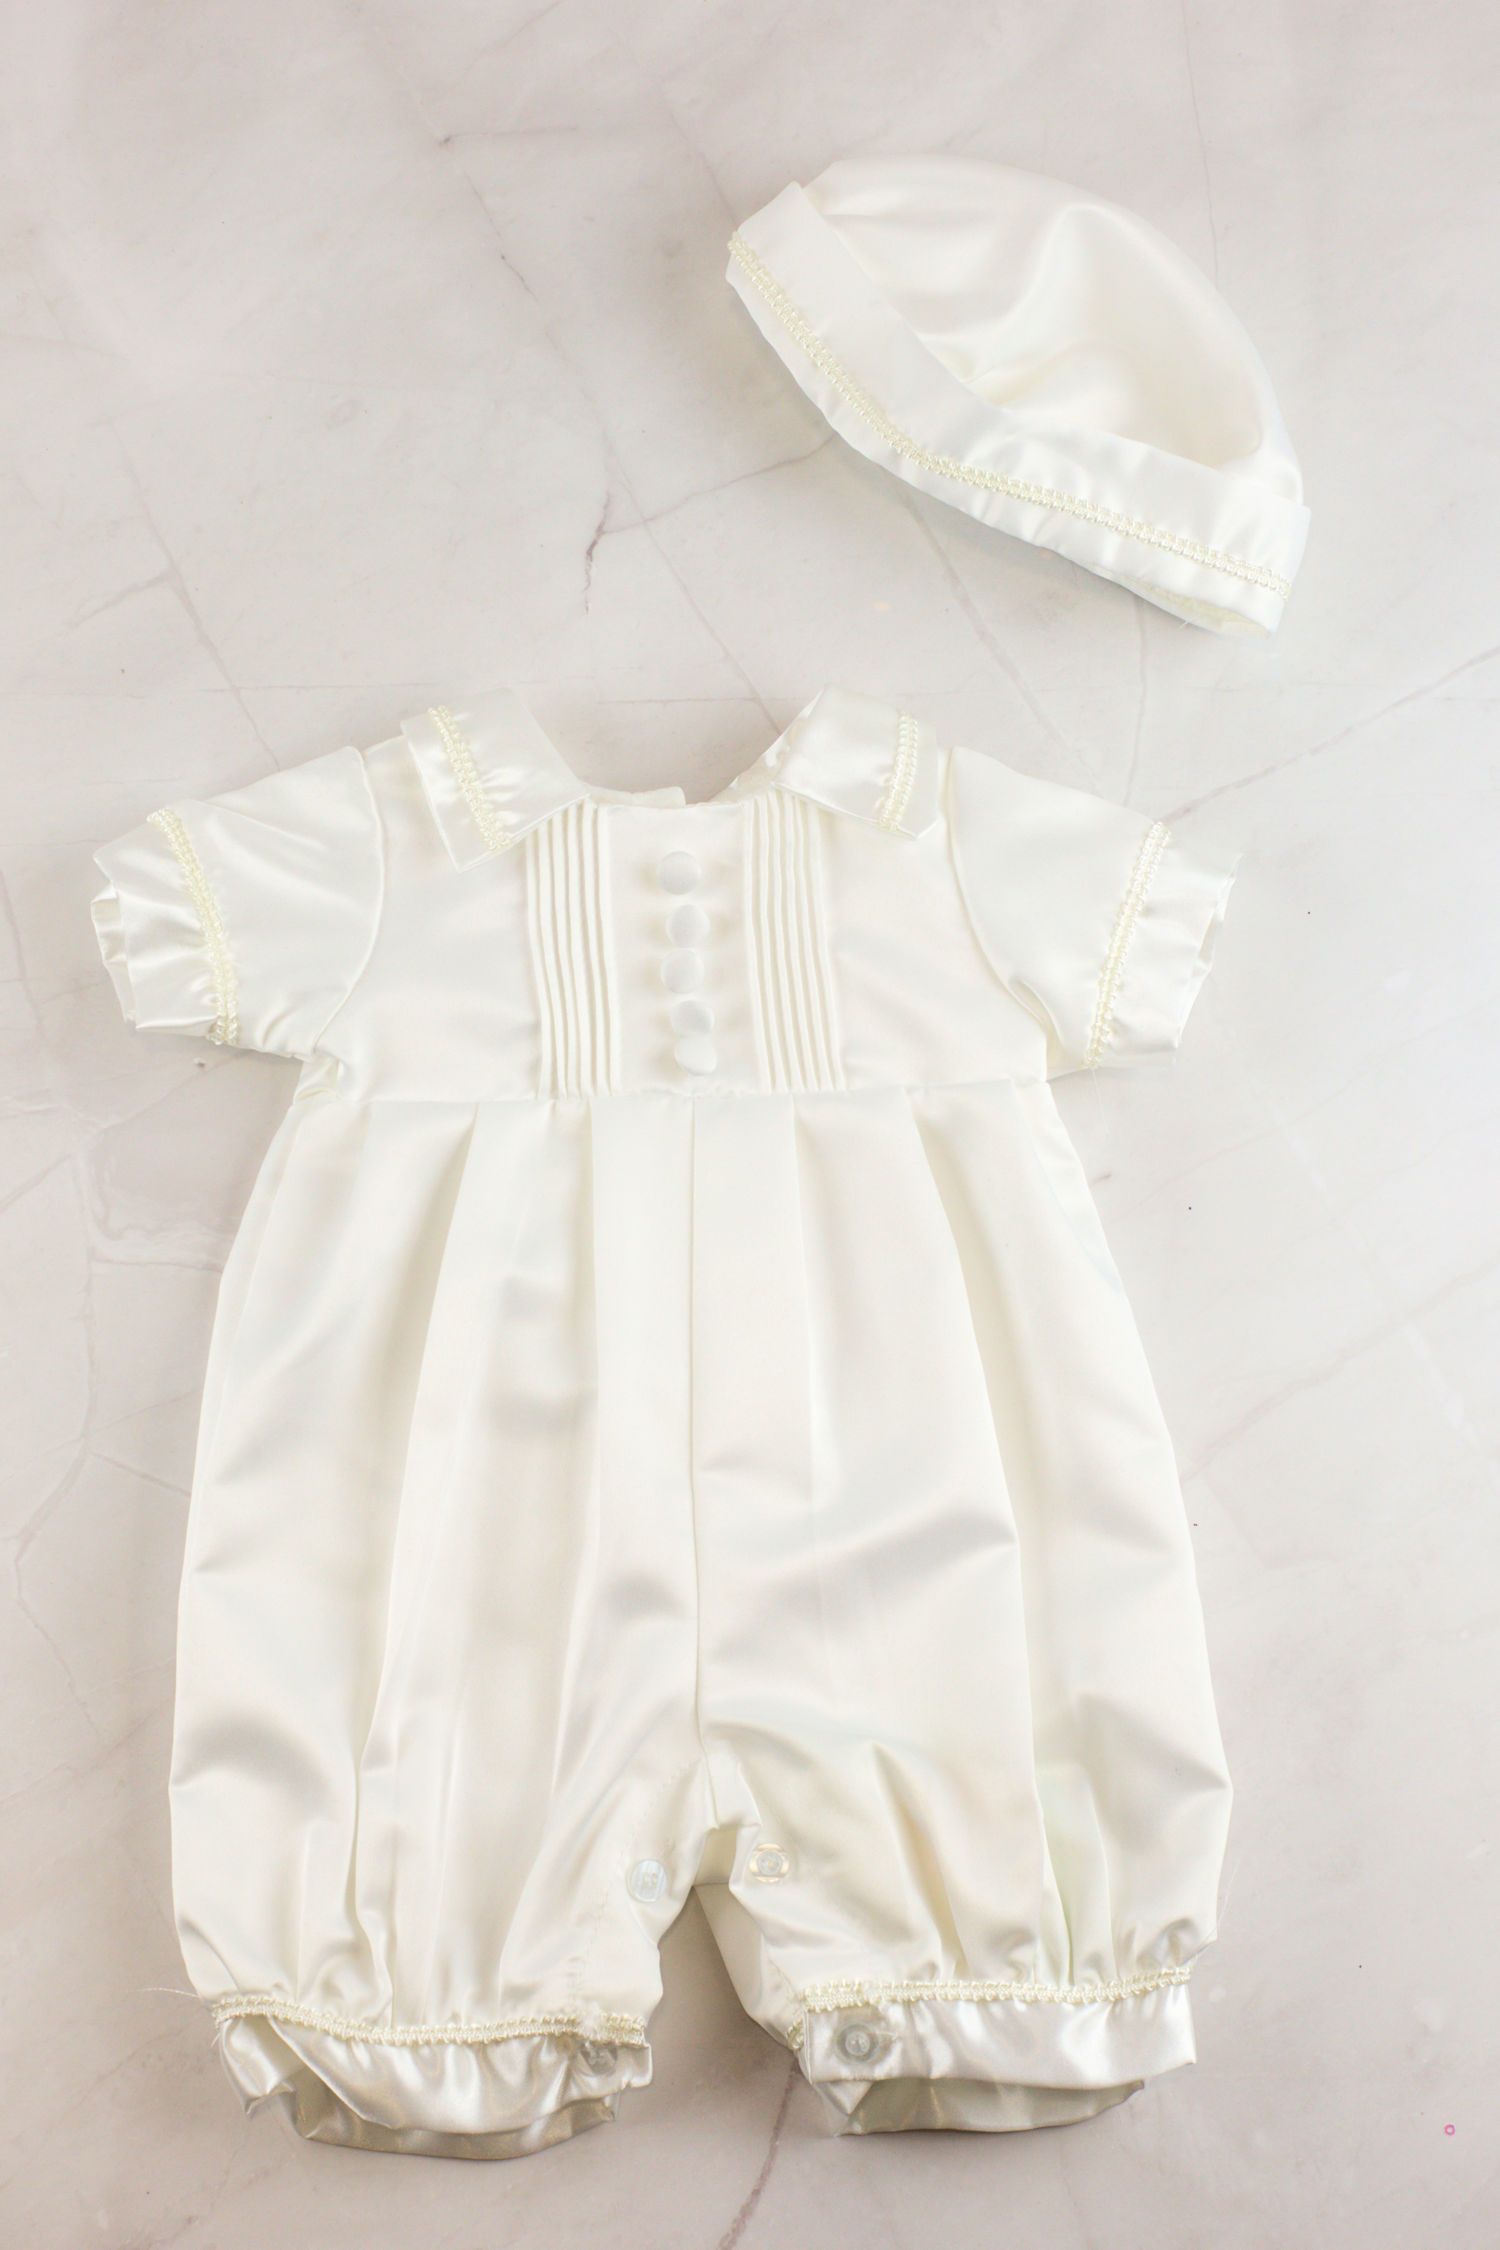 Christening Gowns, Rompers & Accessories